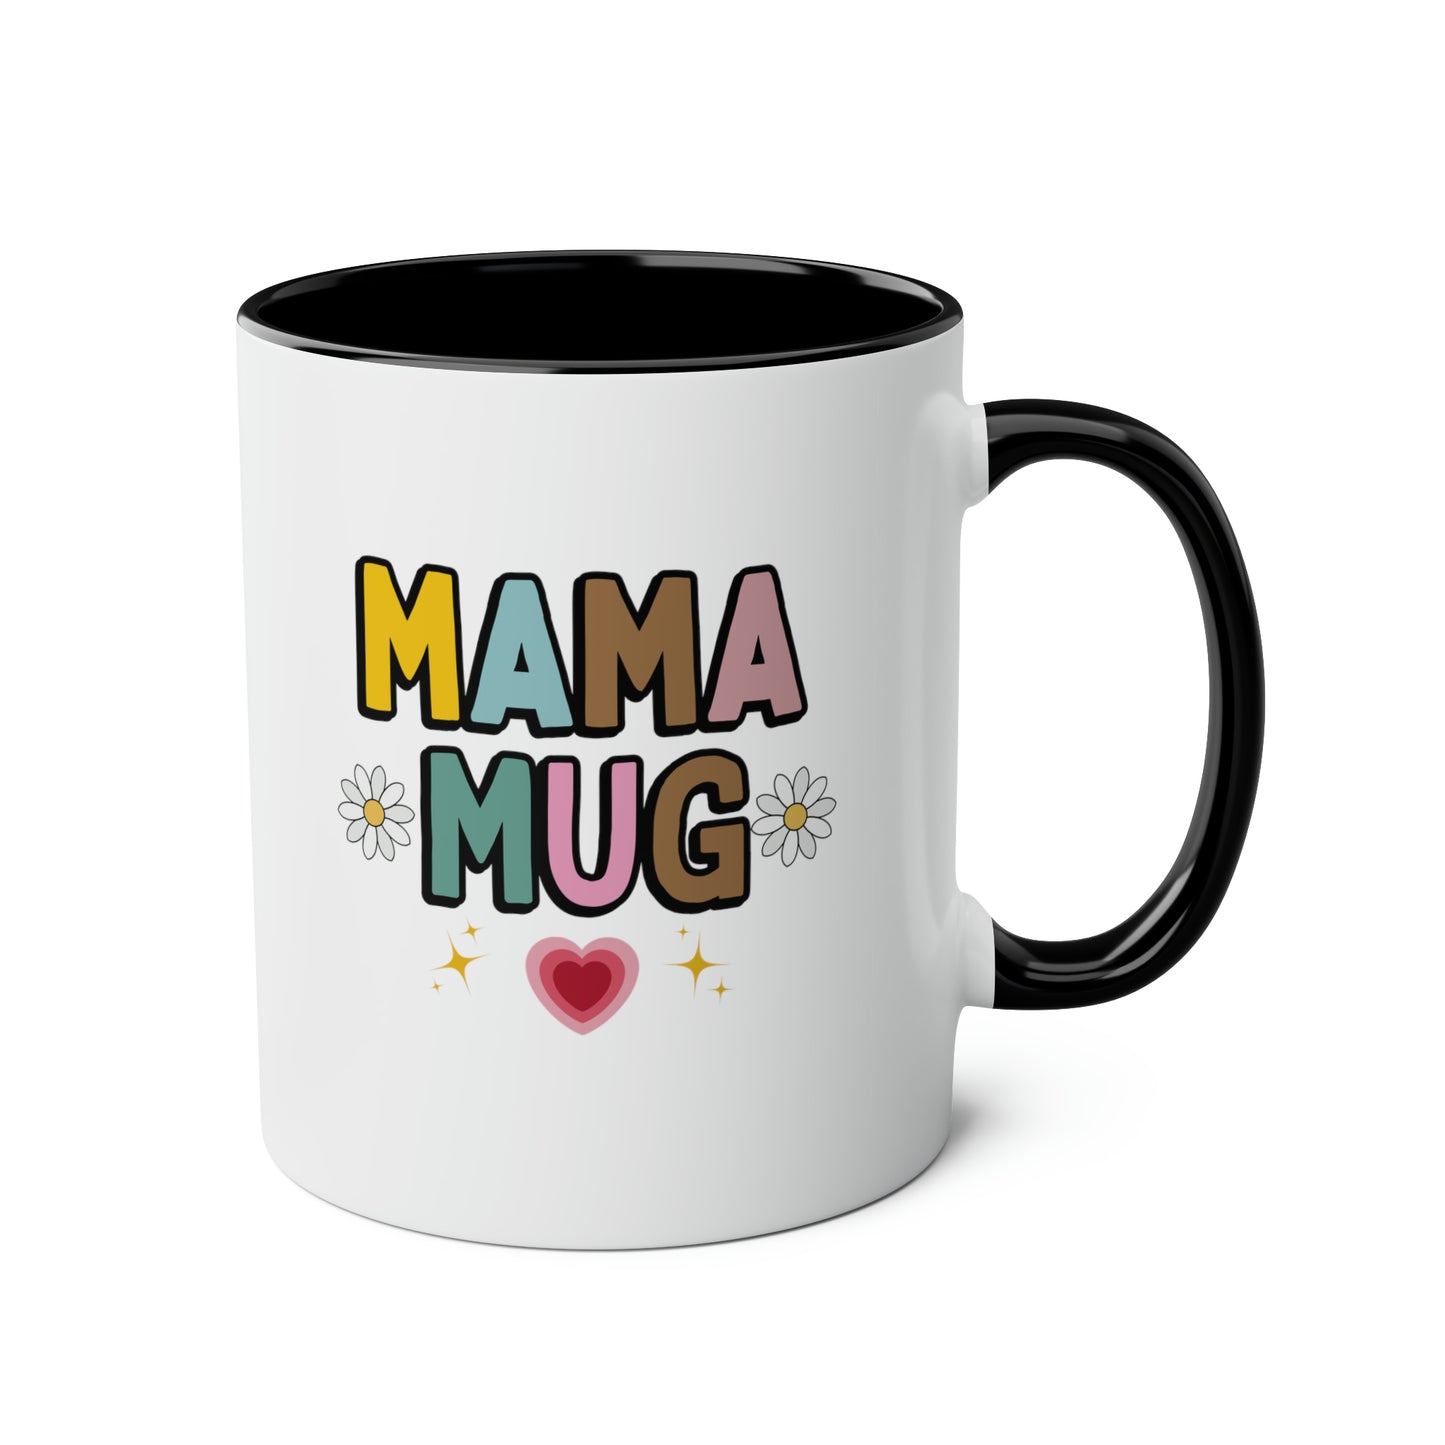 Mama Mug 11oz white with black accent funny large coffee mug gift for new mom mother pregnancy announcement baby shower waveywares wavey wares wavywares wavy wares